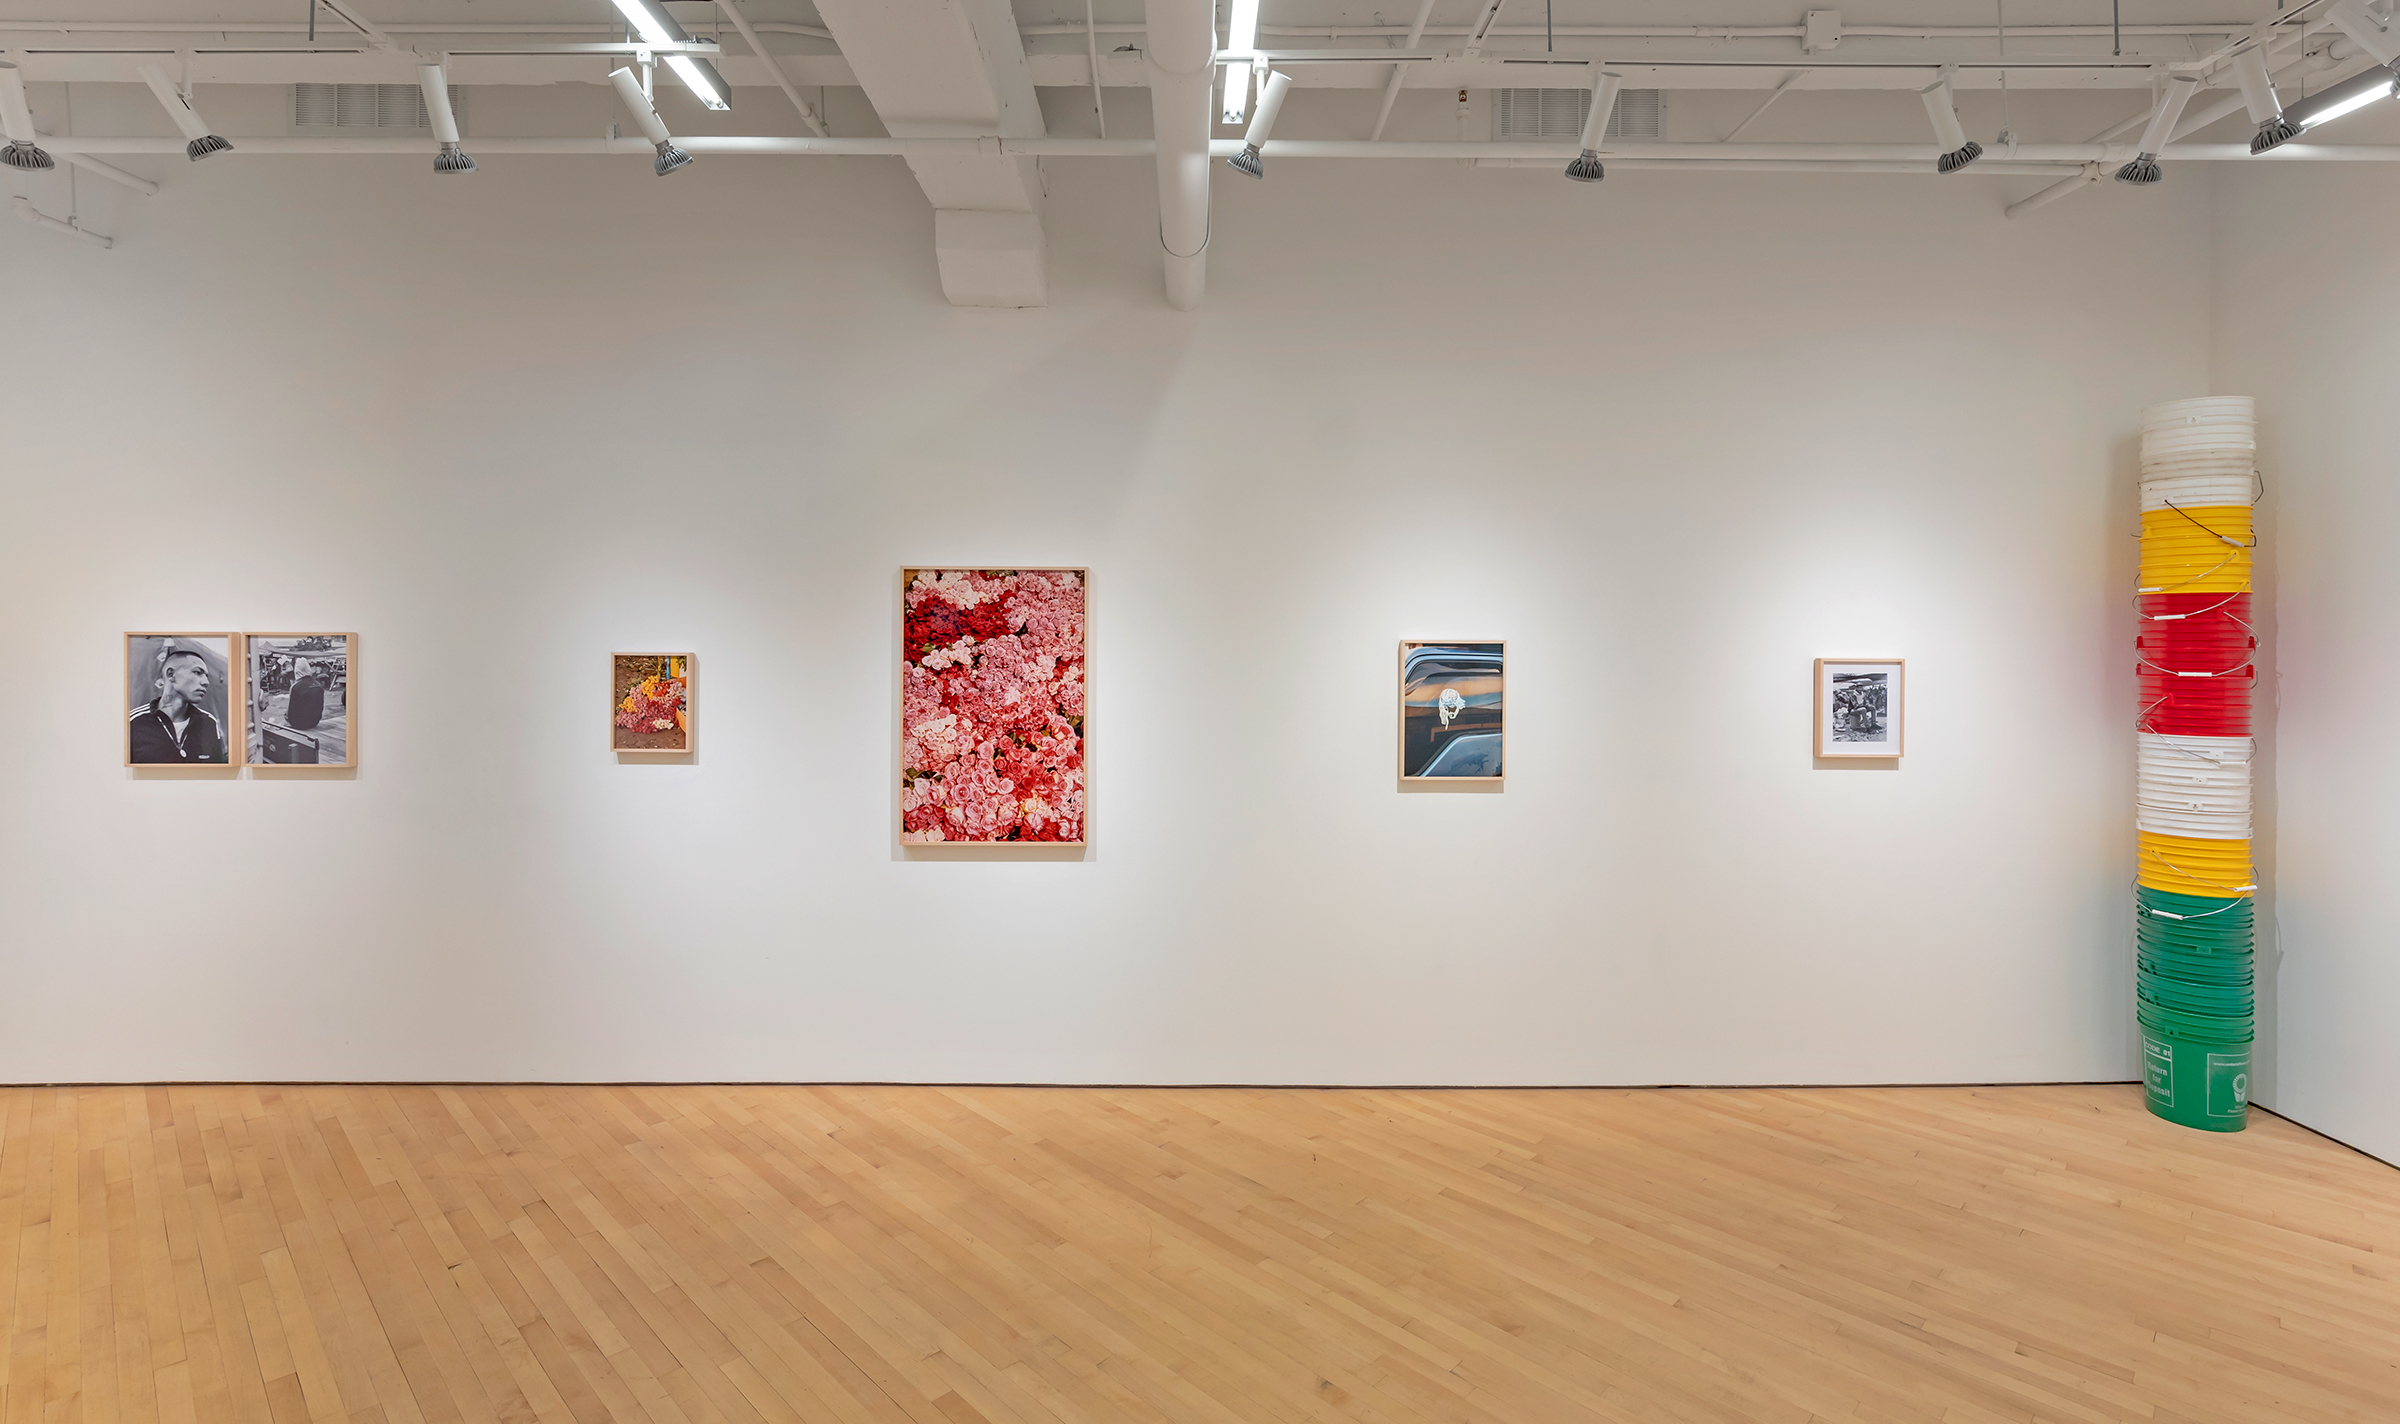     Installation view of Luis Mora, Say it with Flowers, Oct. 17–Nov. 30, 2019, CONTACT Gallery. Documentation photo by Toni Hafkenscheid.

